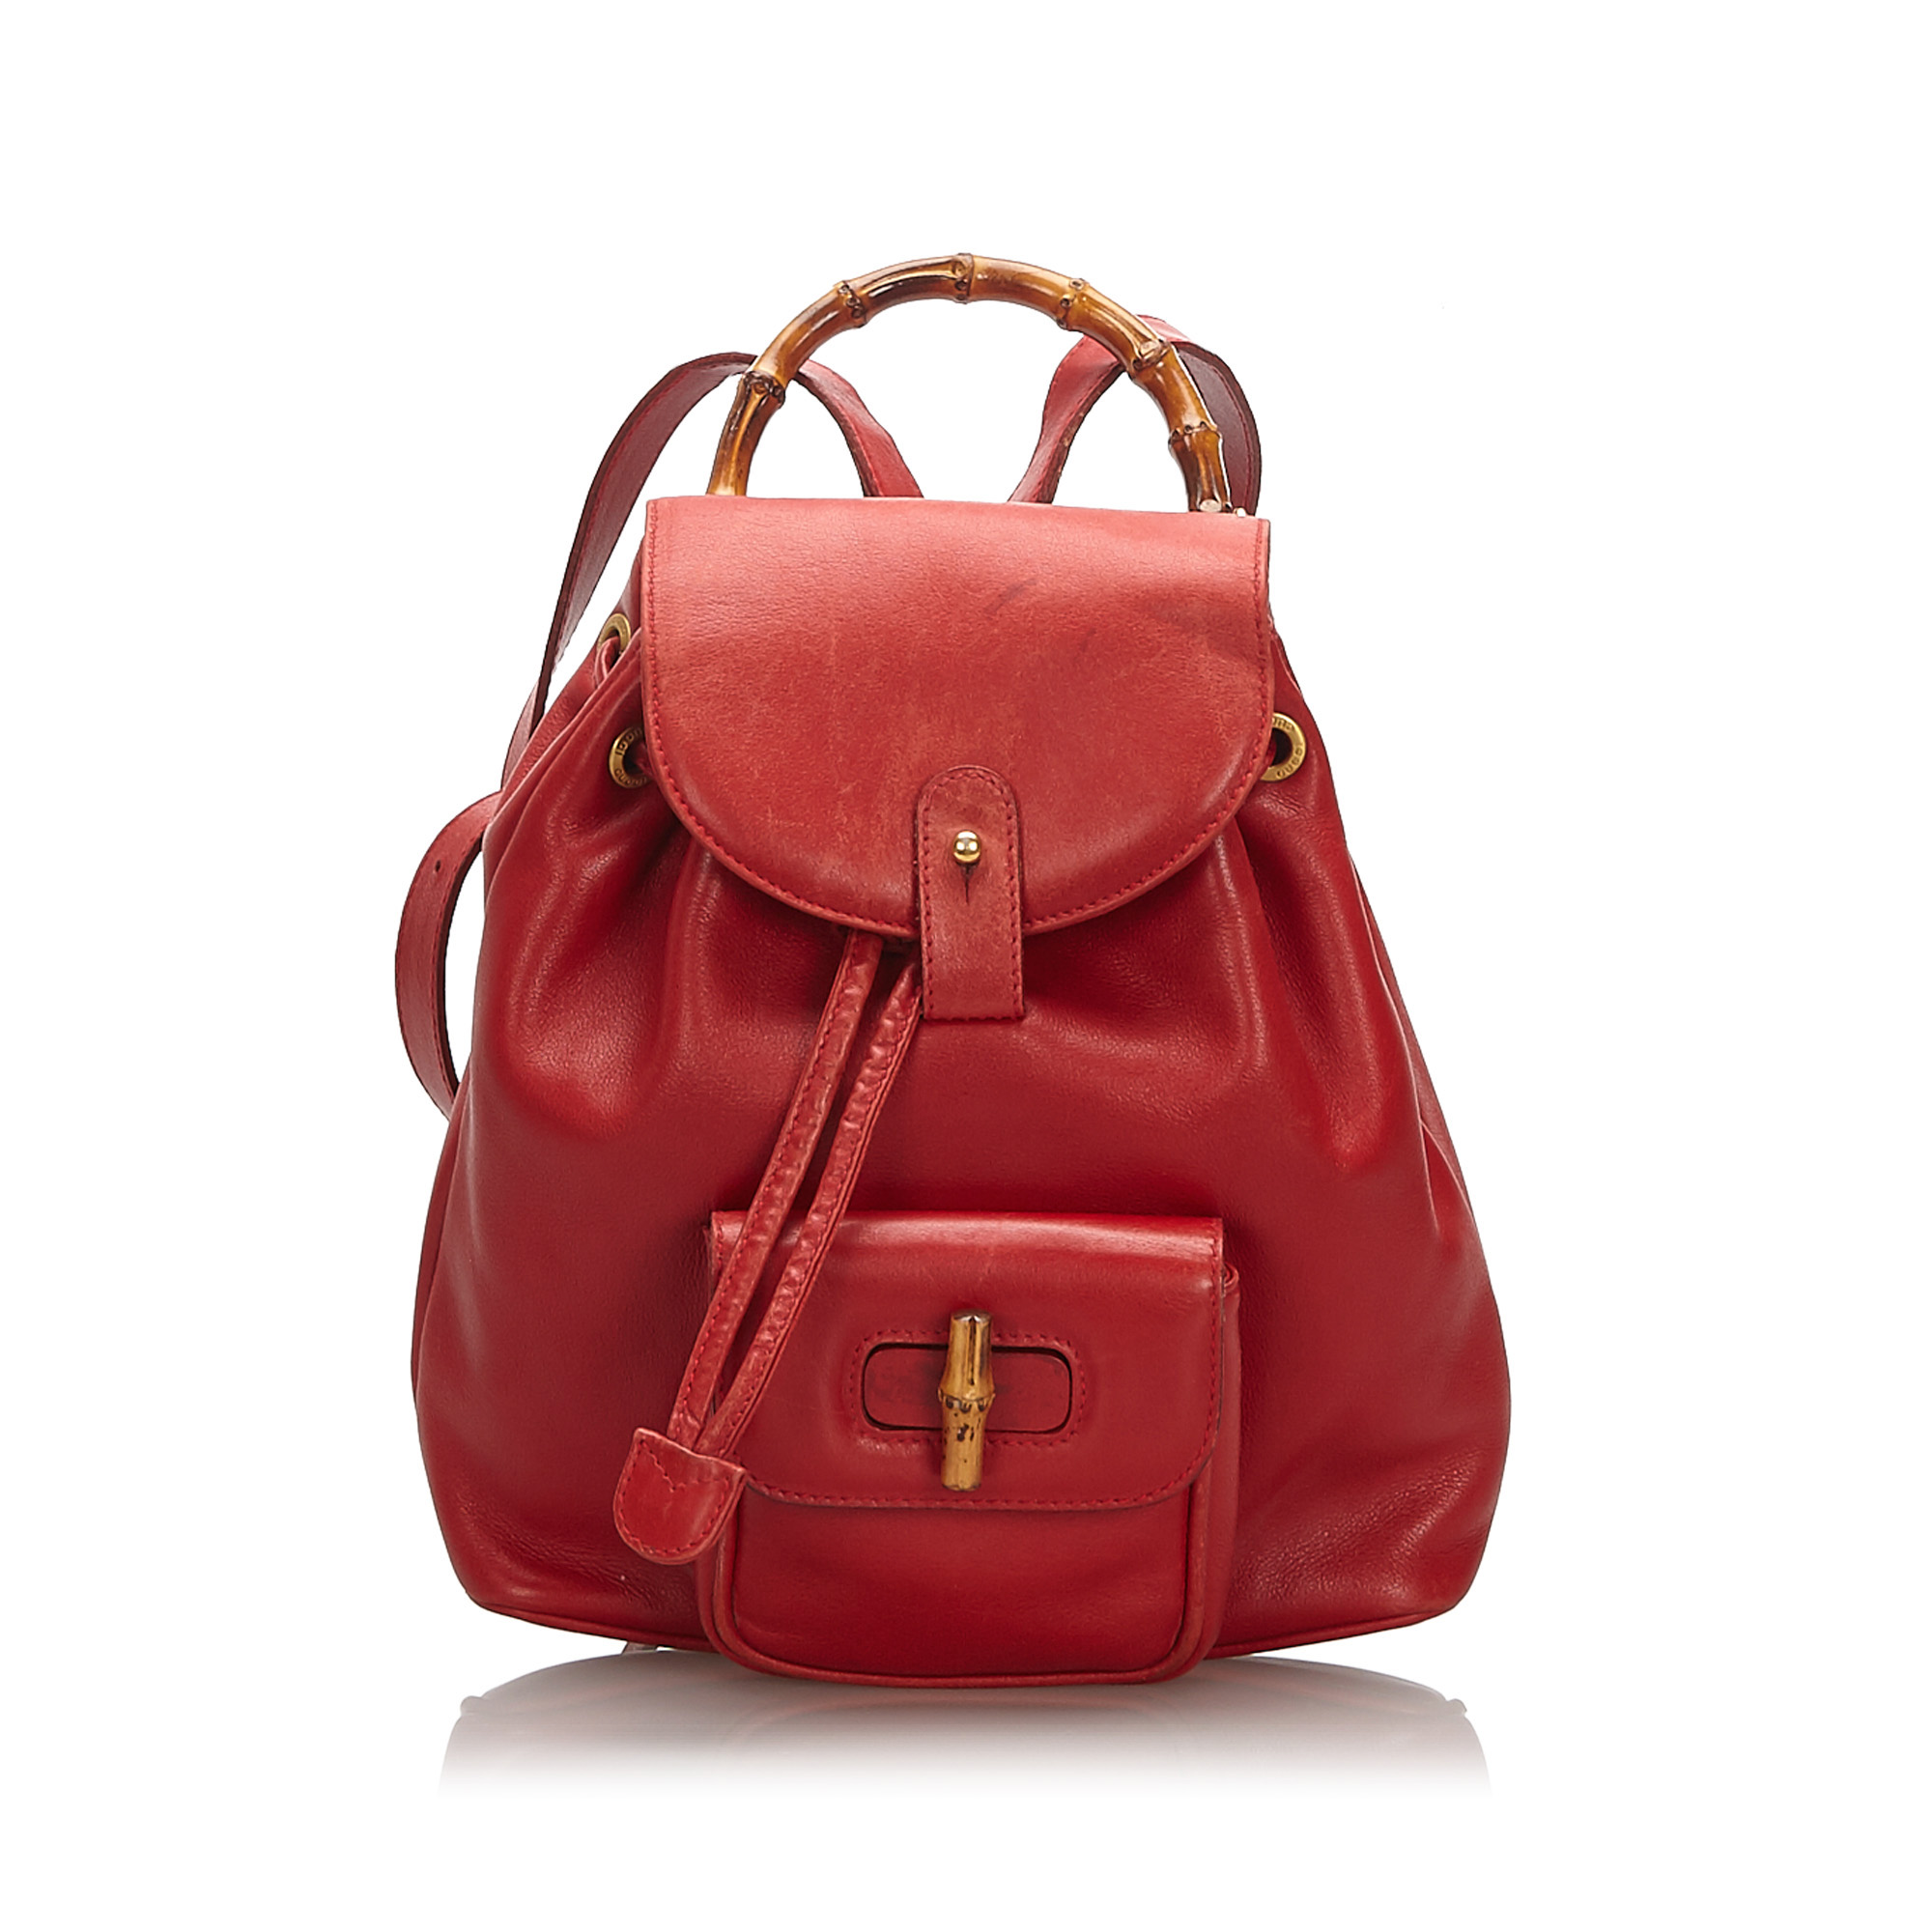 Pre-Loved Gucci Red Others Leather Bamboo Drawstring Backpack Italy | eBay